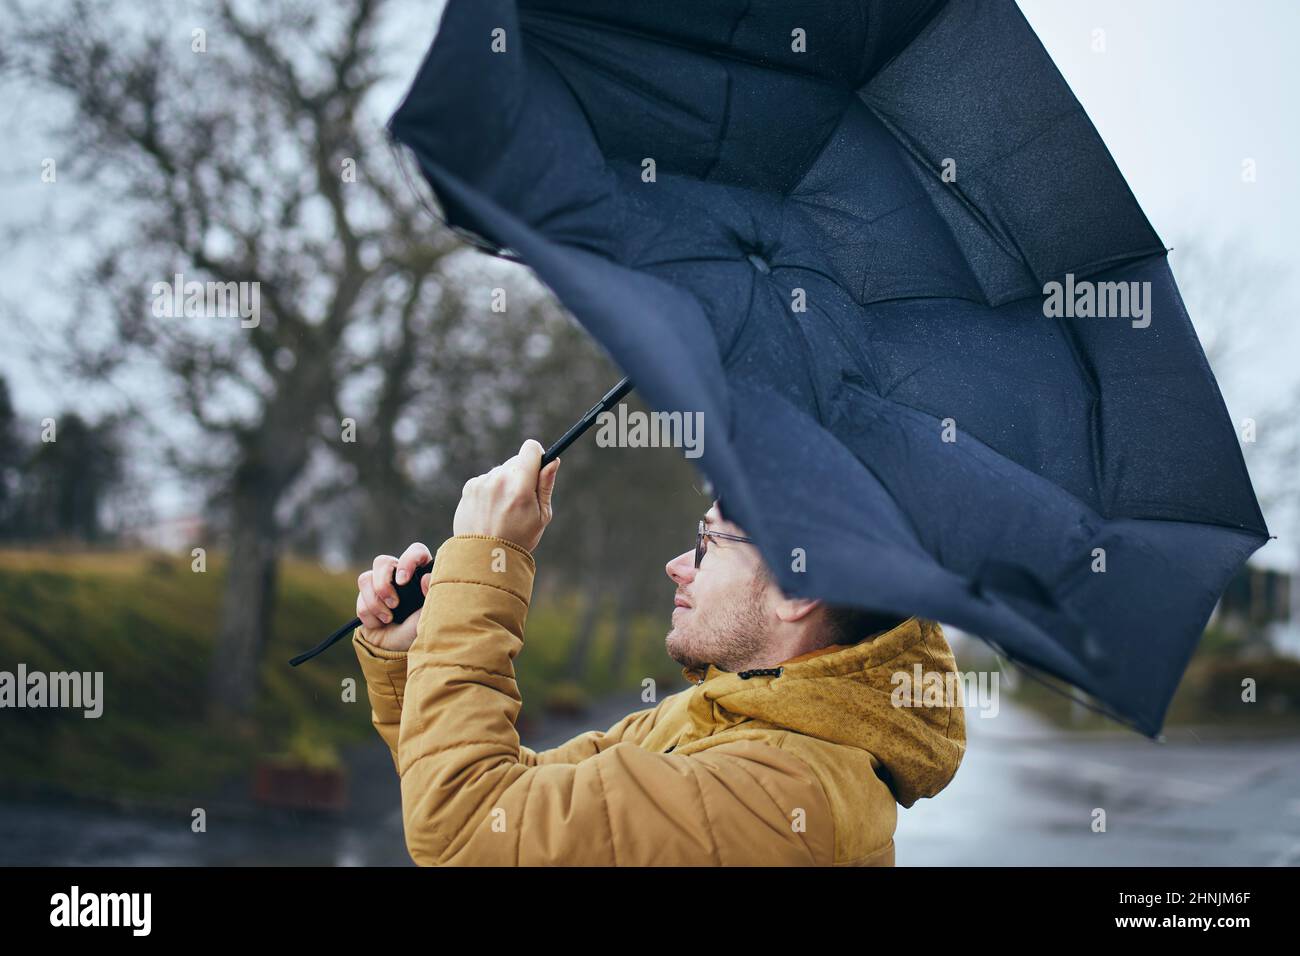 Man holding broken umbrella in strong wind during gloomy rainy day. Themes weather and meteorogy. Stock Photo